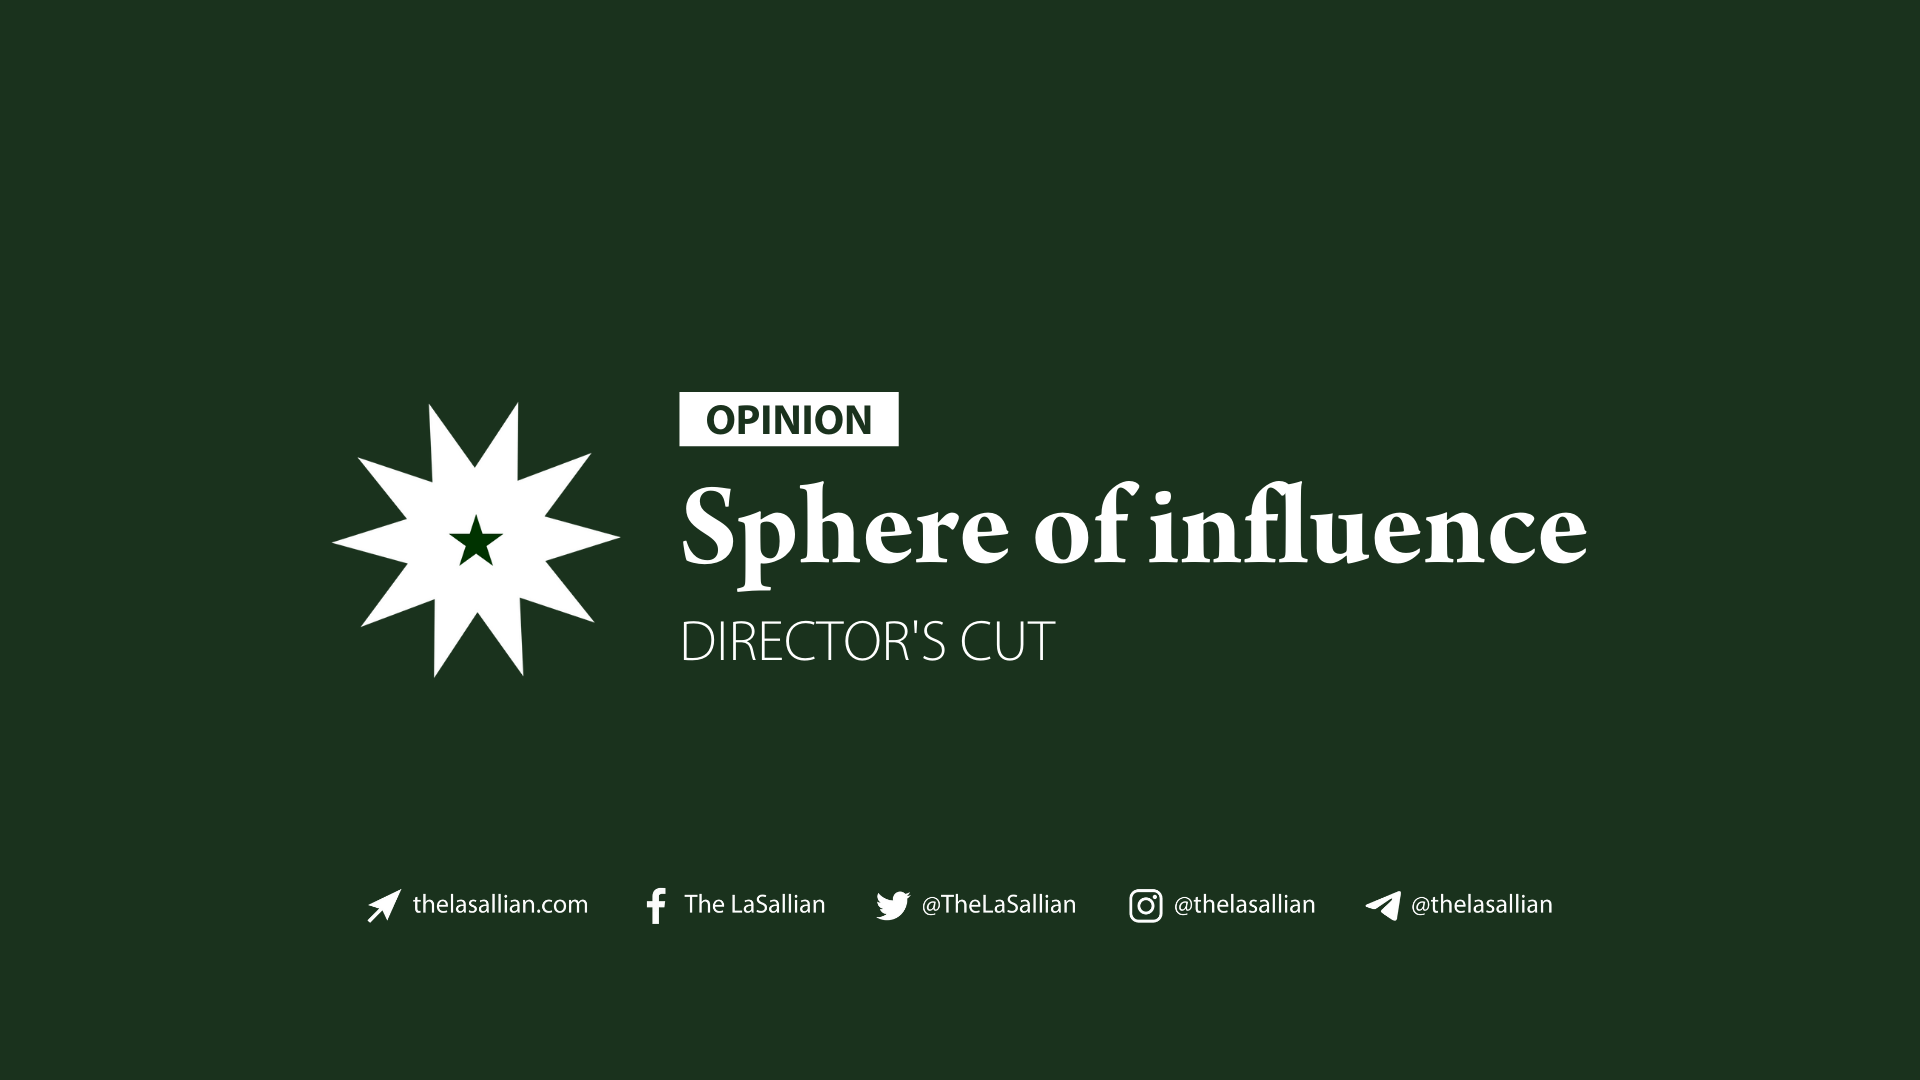 Sphere of influence